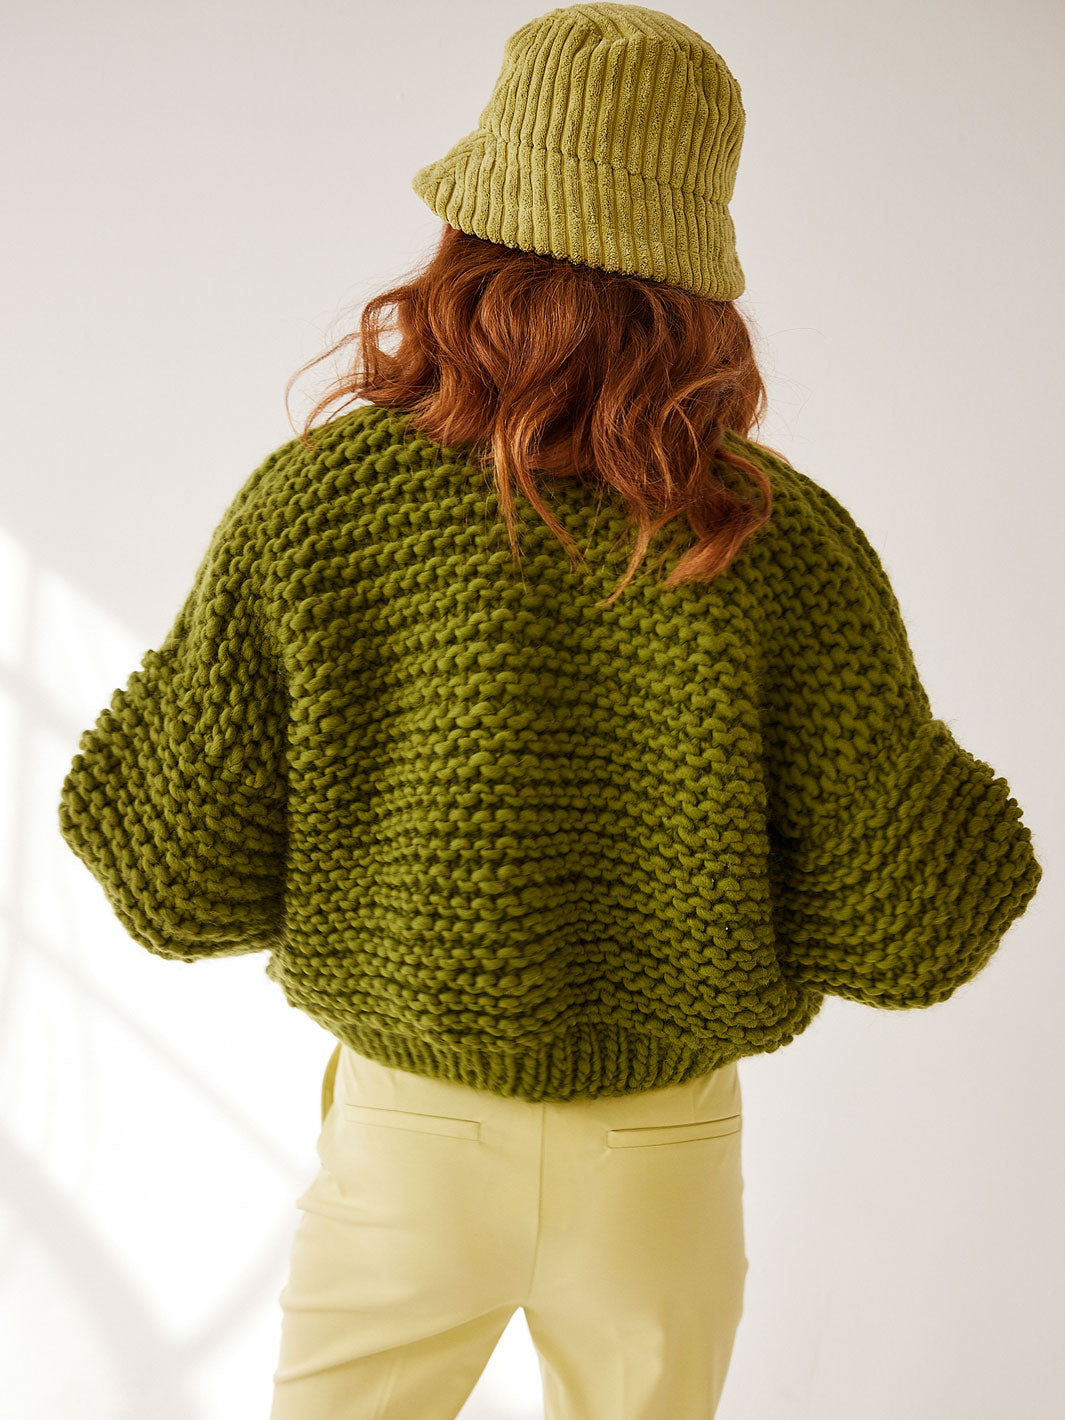 Learn to Knit the Shannon Cardigan with Cardigang